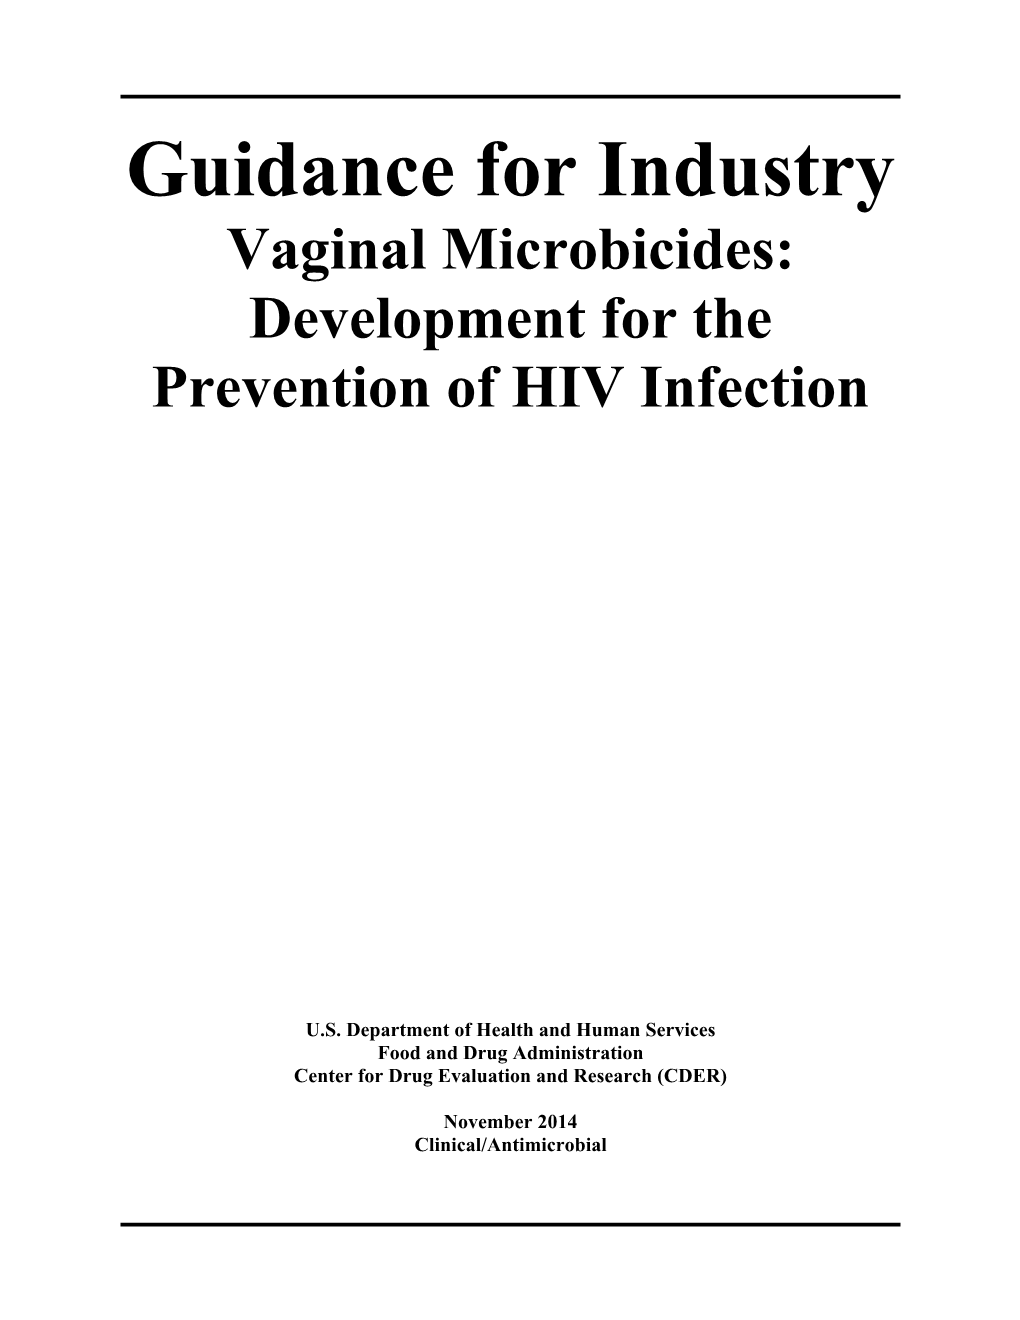 Vaginal Microbicides: Development for the Prevention of HIV Infection